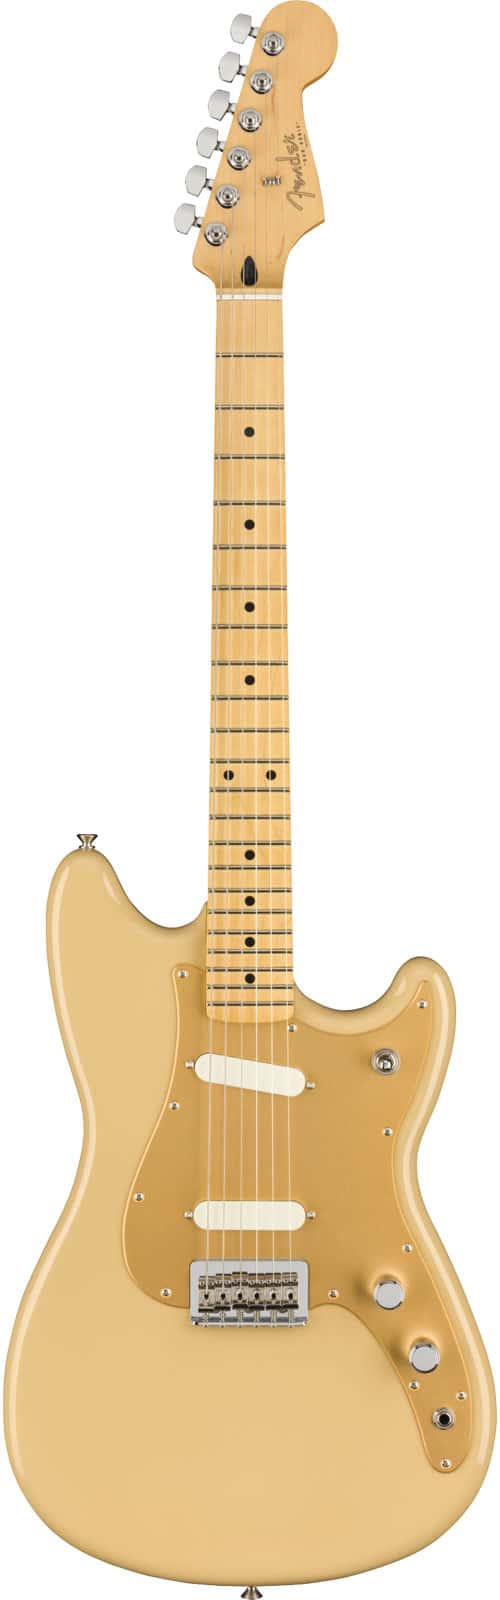 FENDER MEXICAN PLAYER DUO SONIC MN, DESERT SAND